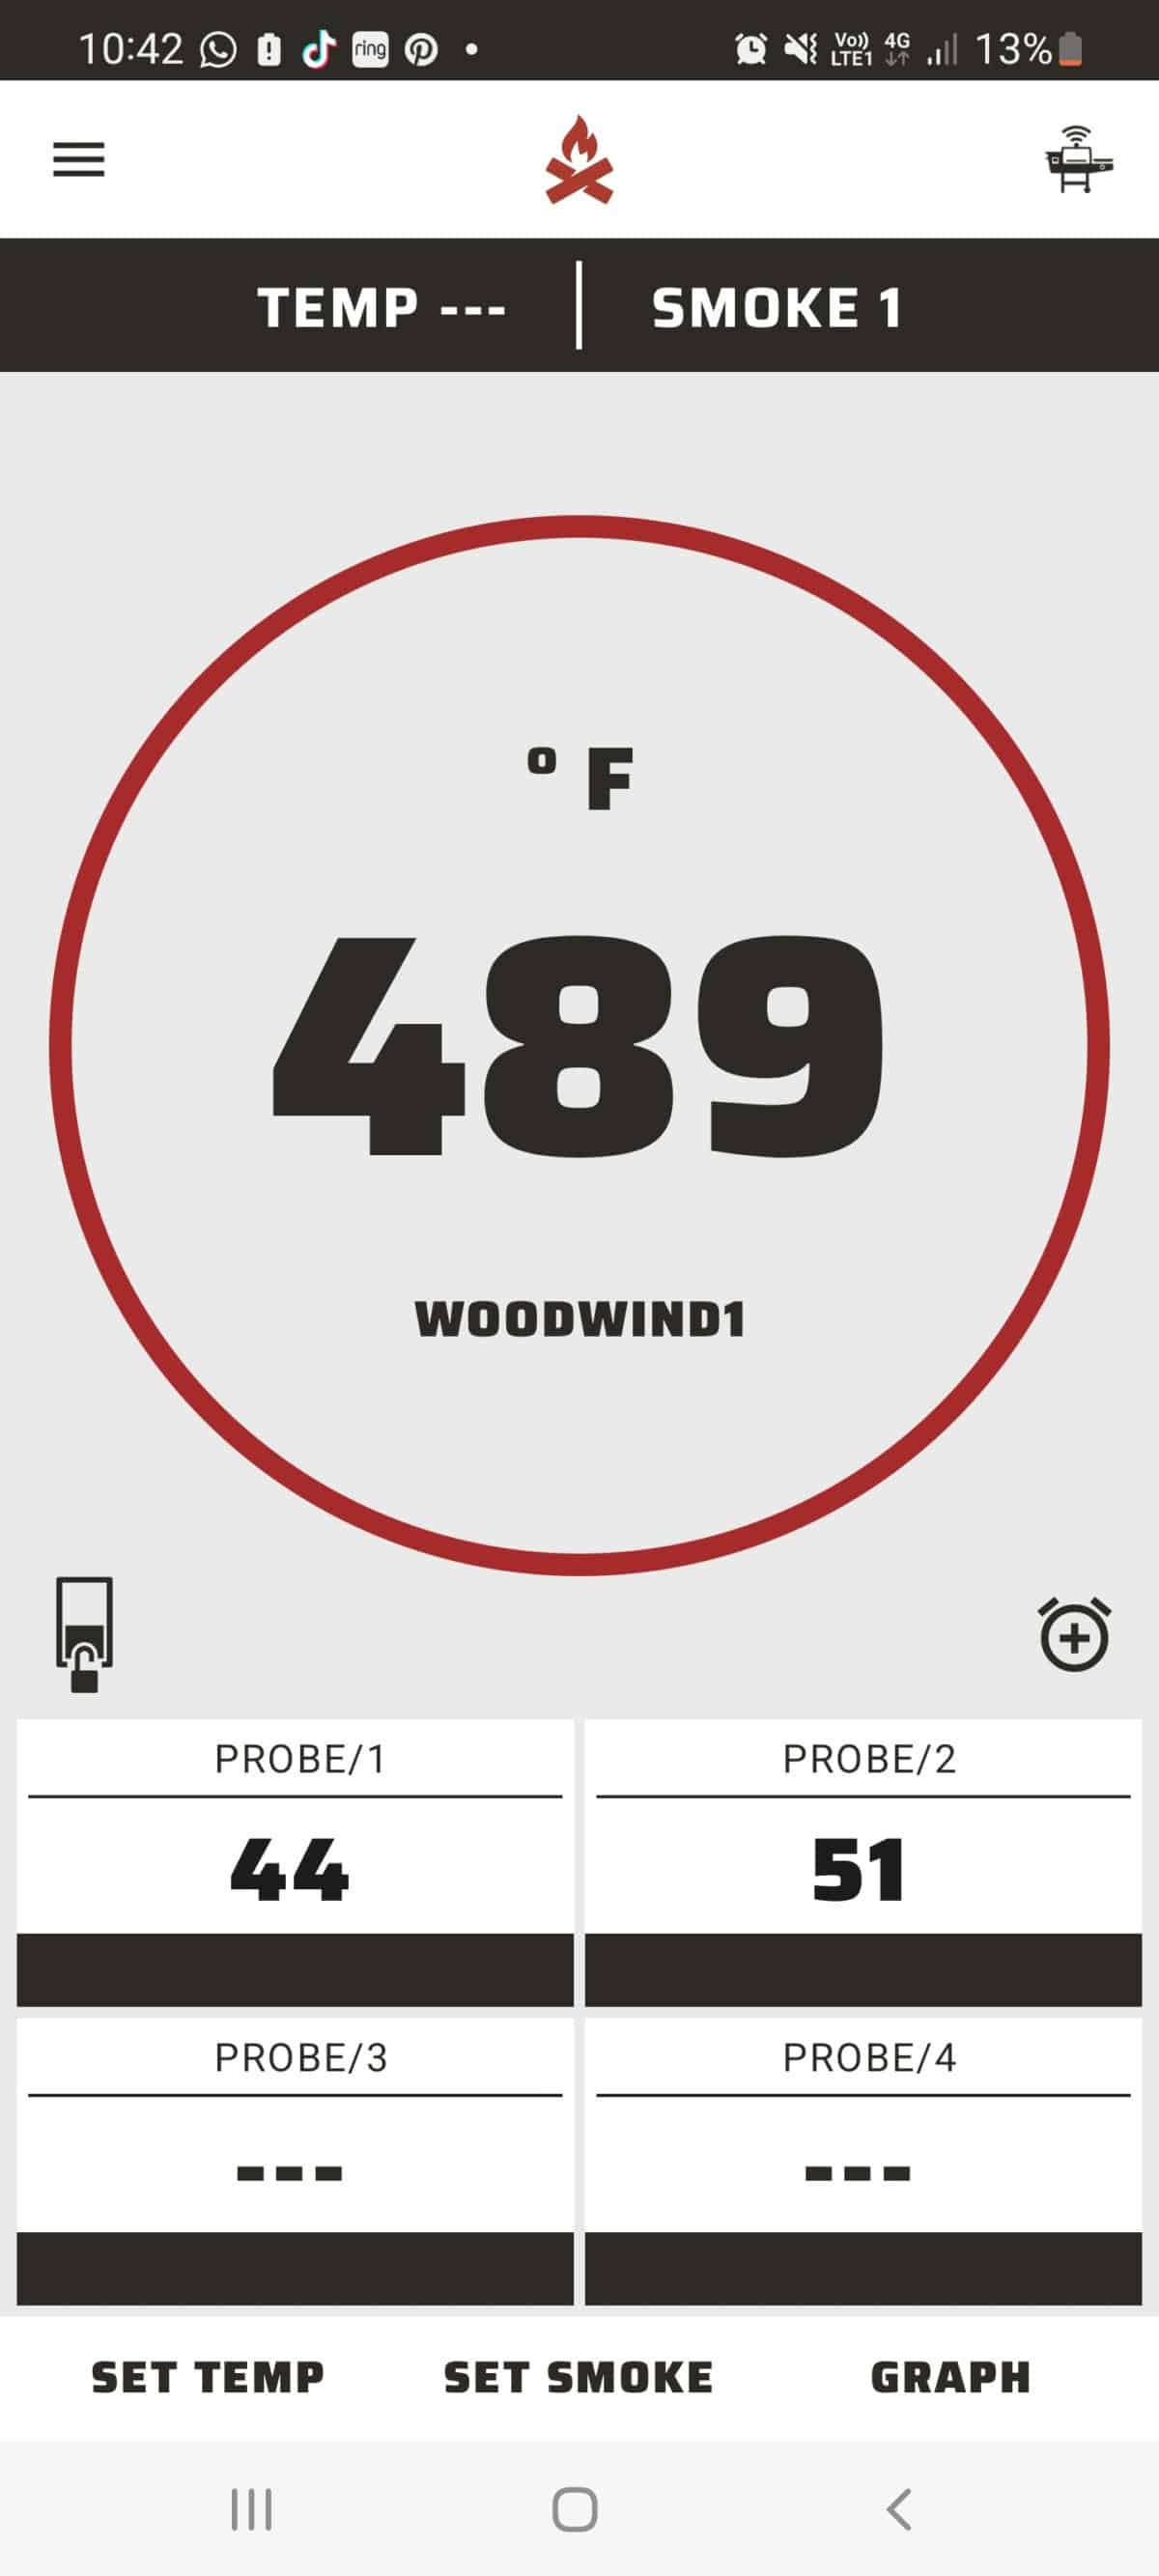 Camp Chef grill controlling smartphone app screenshot showing the temperature screen of a Woodwind Wi-Fi 36 grill